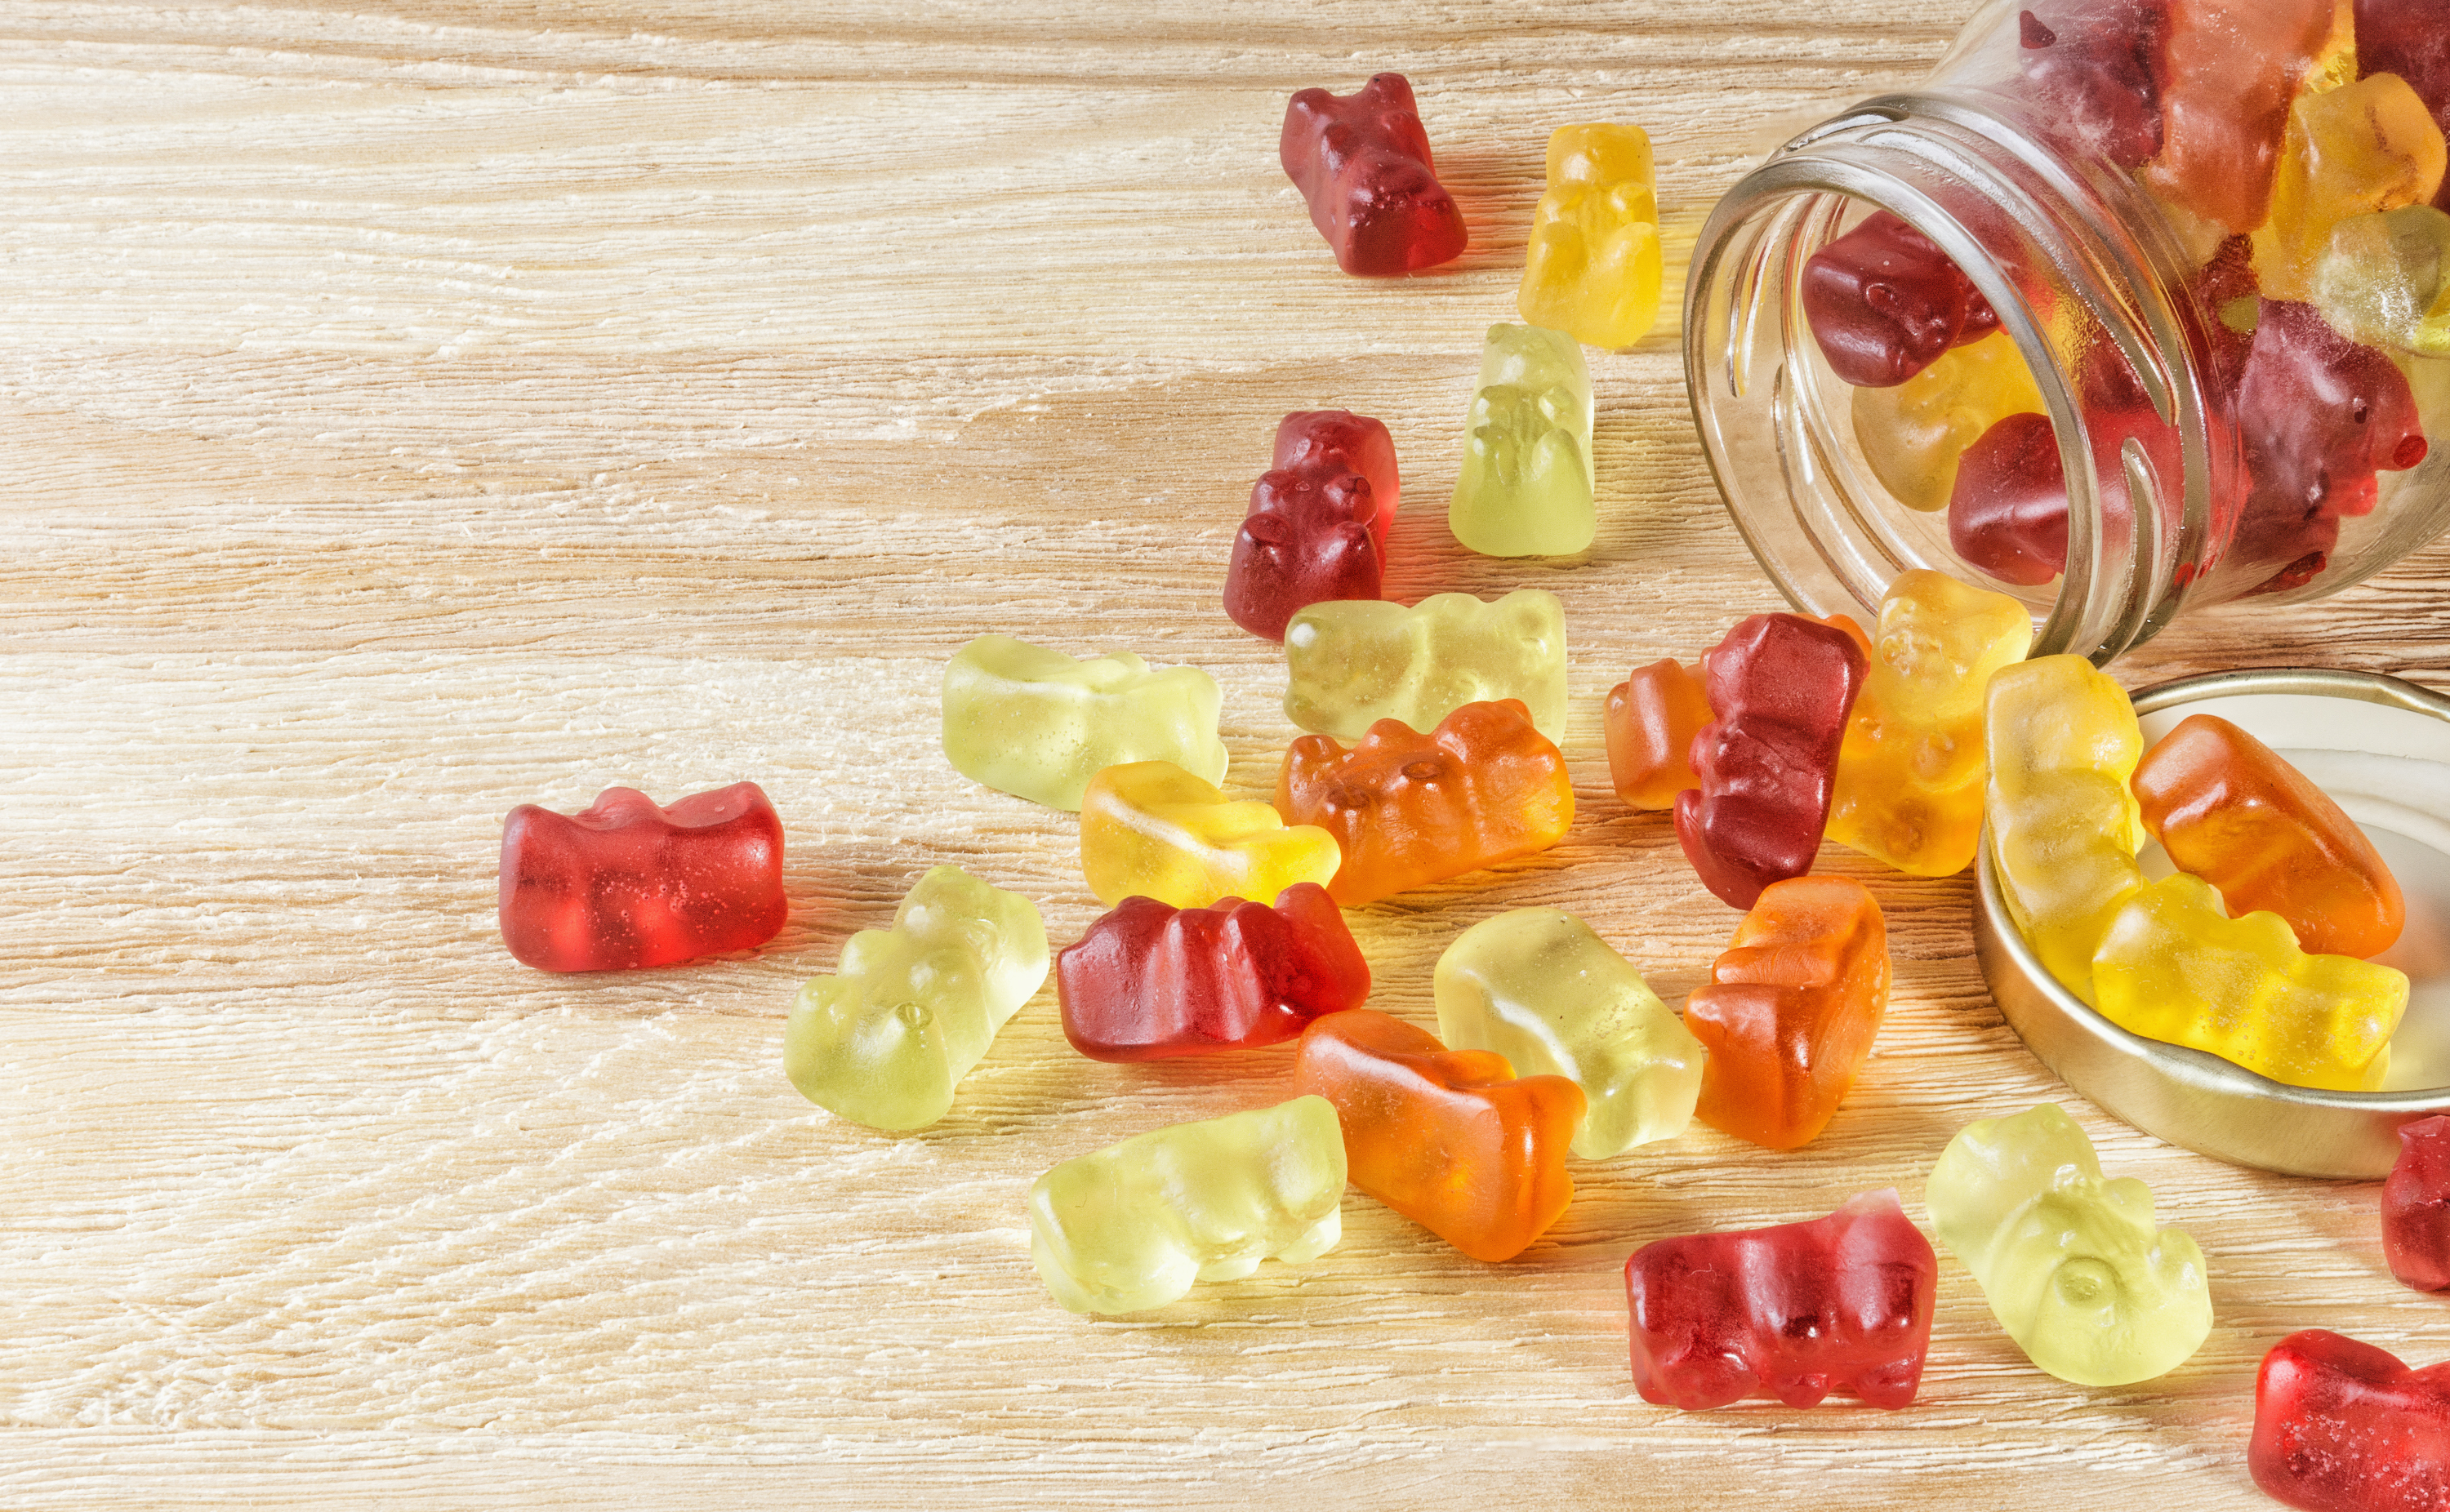 The demand for new formats, including gummies, increases in 2022